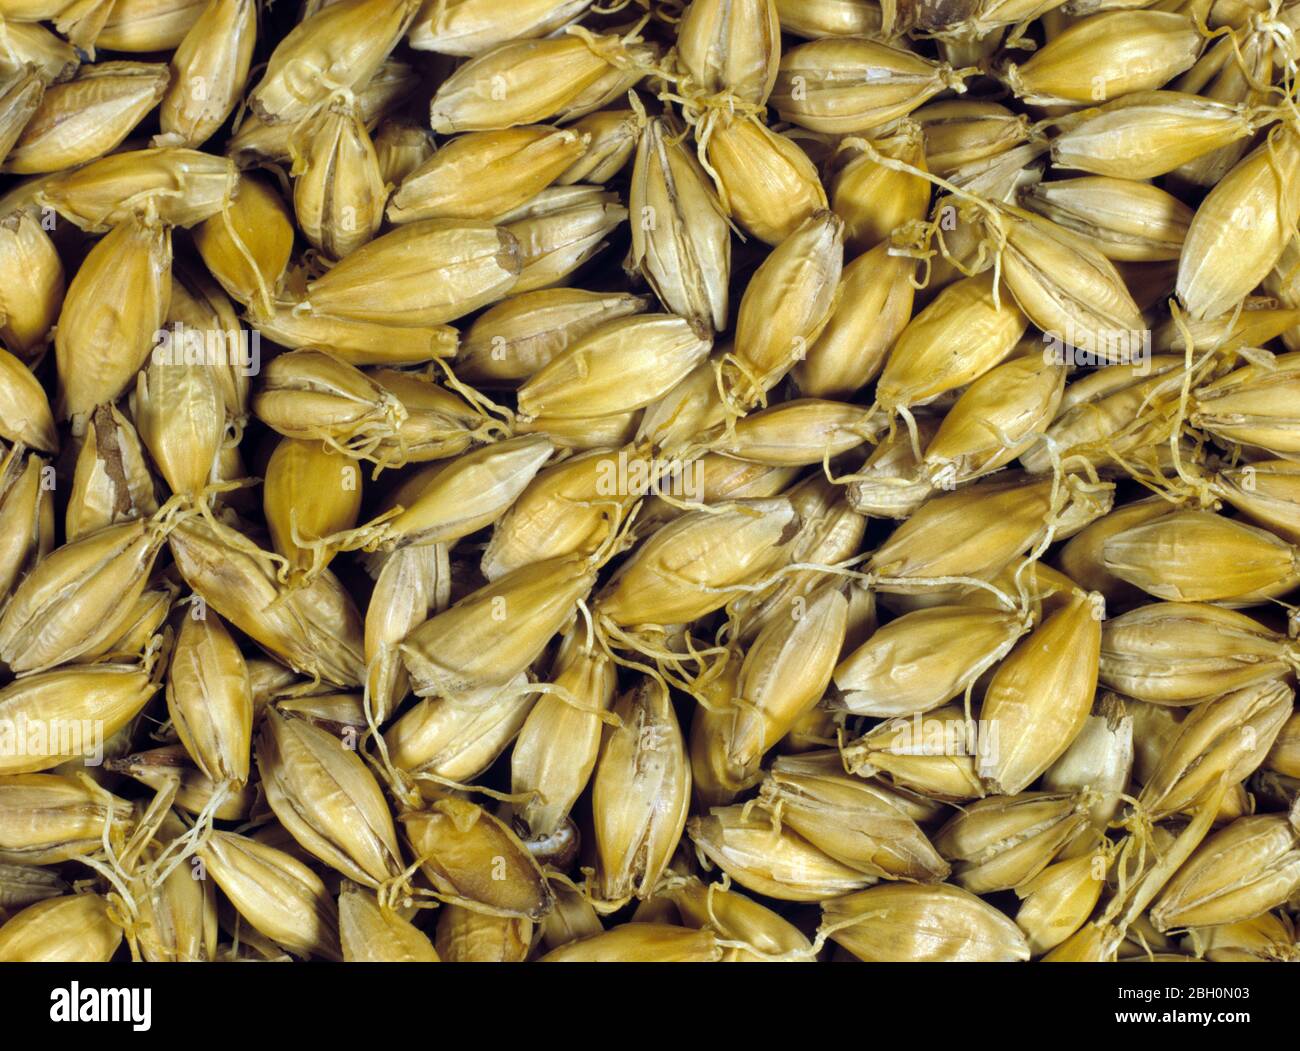 Process of malting barley seed to produce malt stage 6.  Barley seed  dried after chitting and kilning Stock Photo